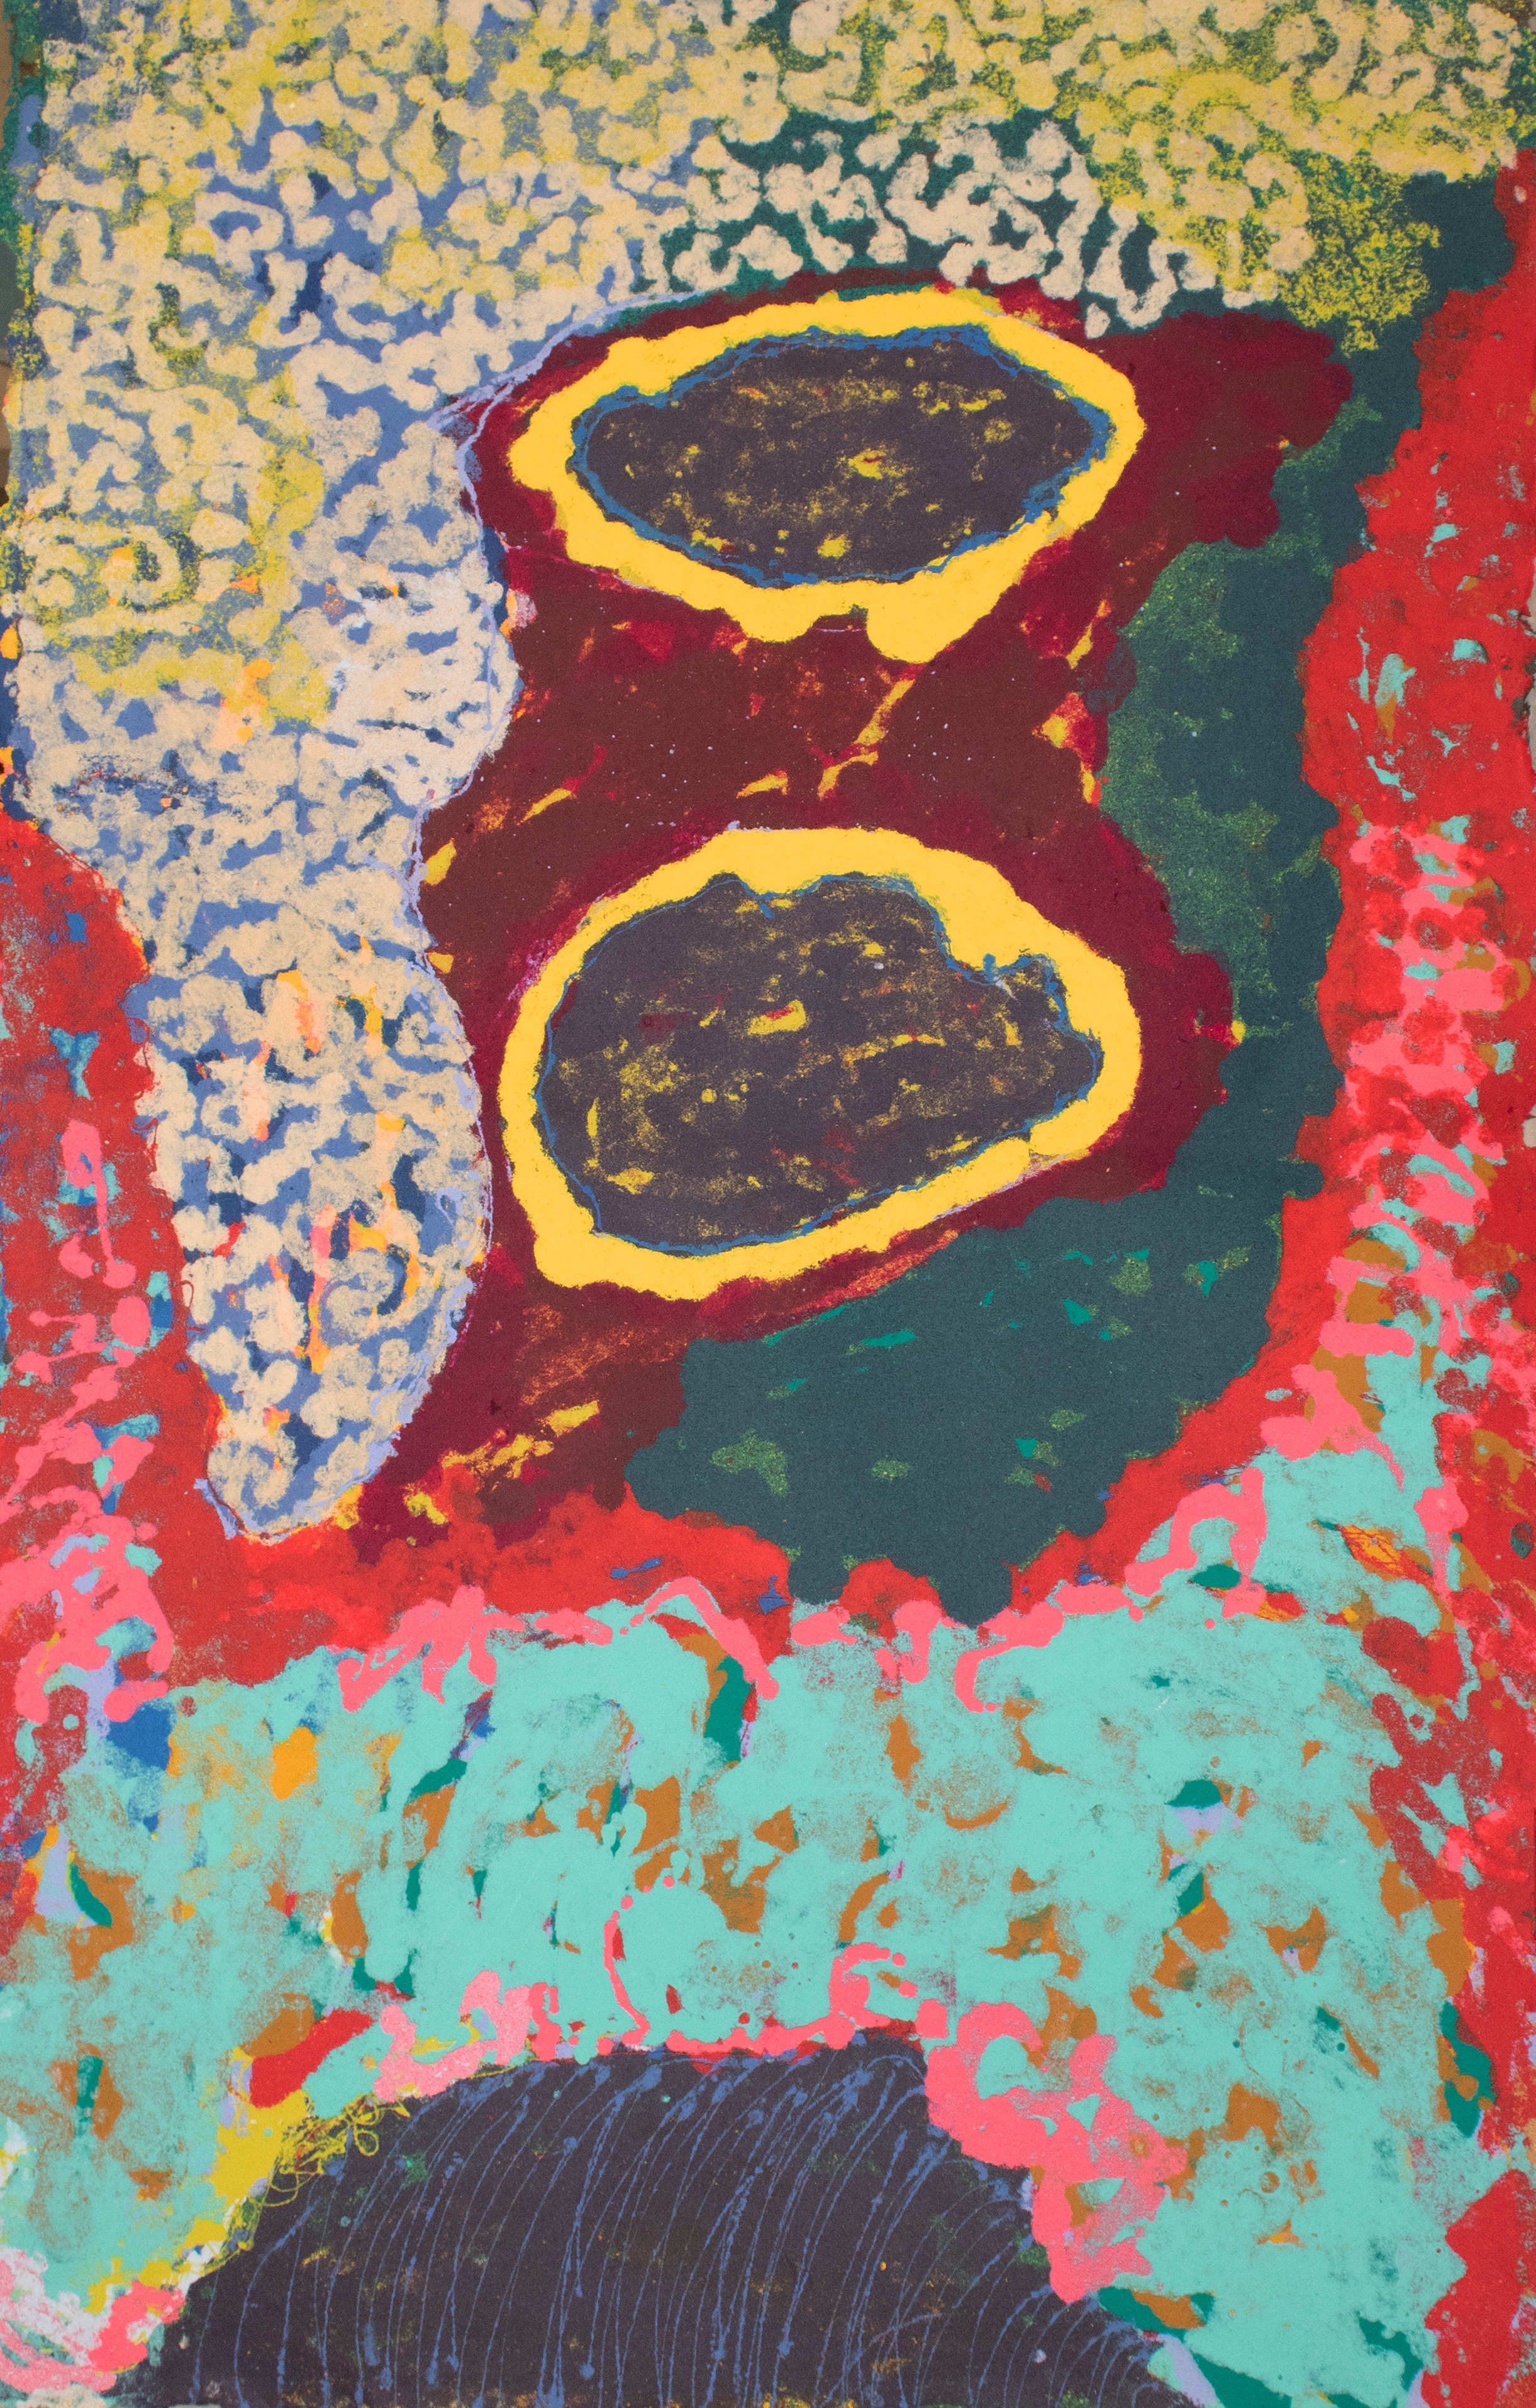 This abstract has two horizontally oriented brown ovals rimmed in blue and yellow rings dominating the composition at  center of the upper two-thirds of the work. These ovals rest on a mass of crimson hugged along the upper and left sides by a squiggly mass of white lines with blue and grey peeking out, and a thin green organic form to the right of the crimson mass. The lower half of the composition is occupied by red an coral topped with a shock of turquoise and a black half circle along the bottom edge